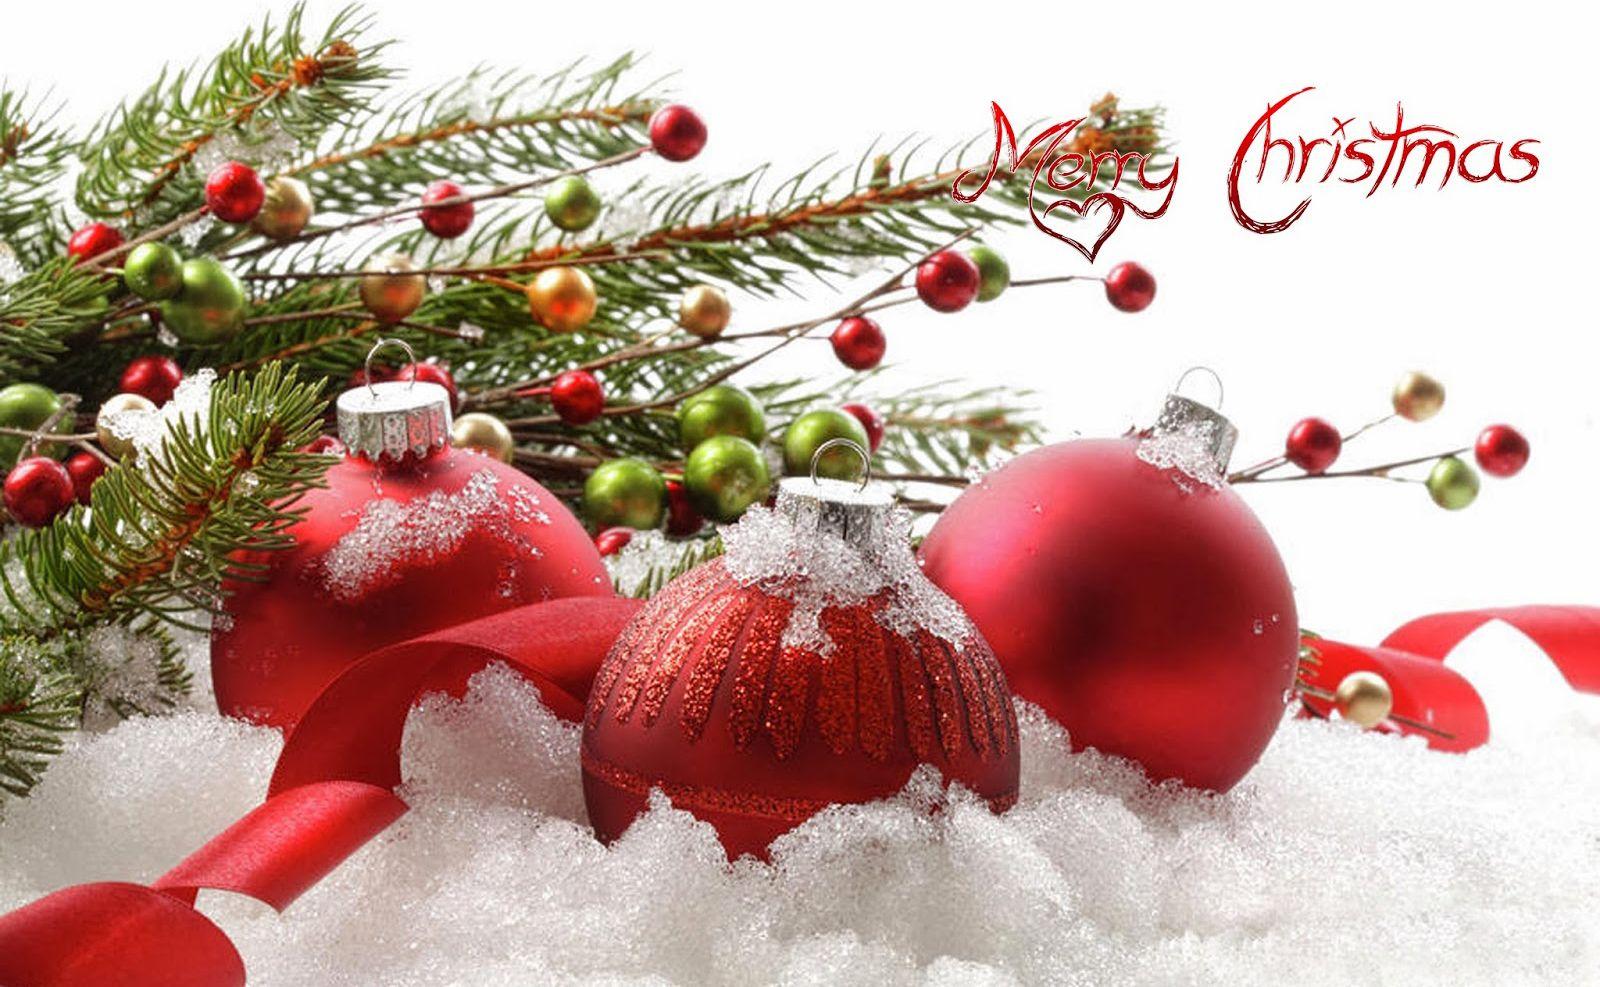 merry christmas wishes messages image wallpaper greetings quotes: 2015